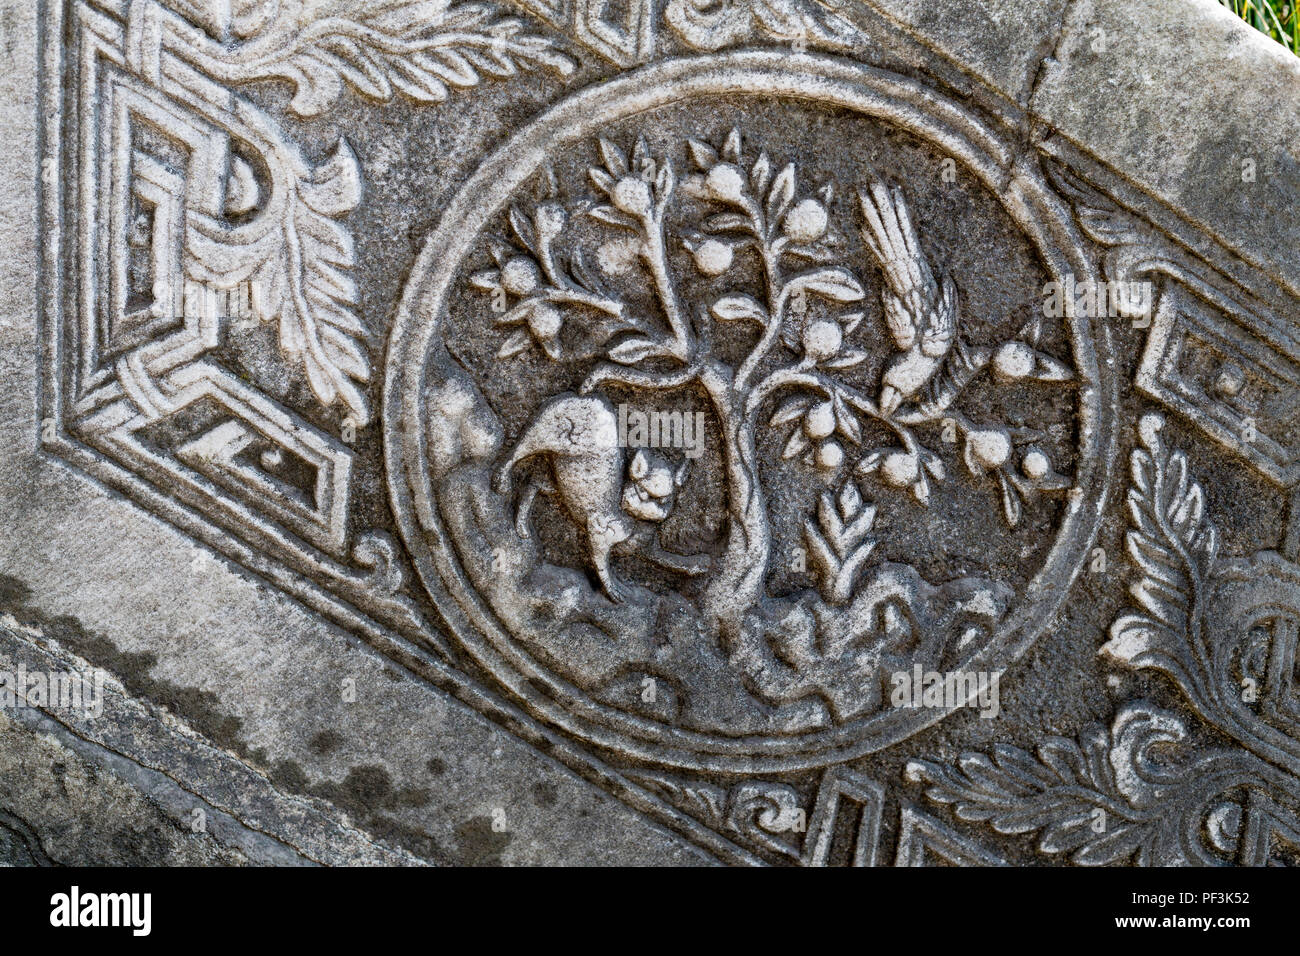 Yangzhou, Jiangsu, China.  Floral Motif Carved in Stone on Stairway Entrance to Graveyard of Puhaddin, 13th-century Muslim Missionary. Stock Photo